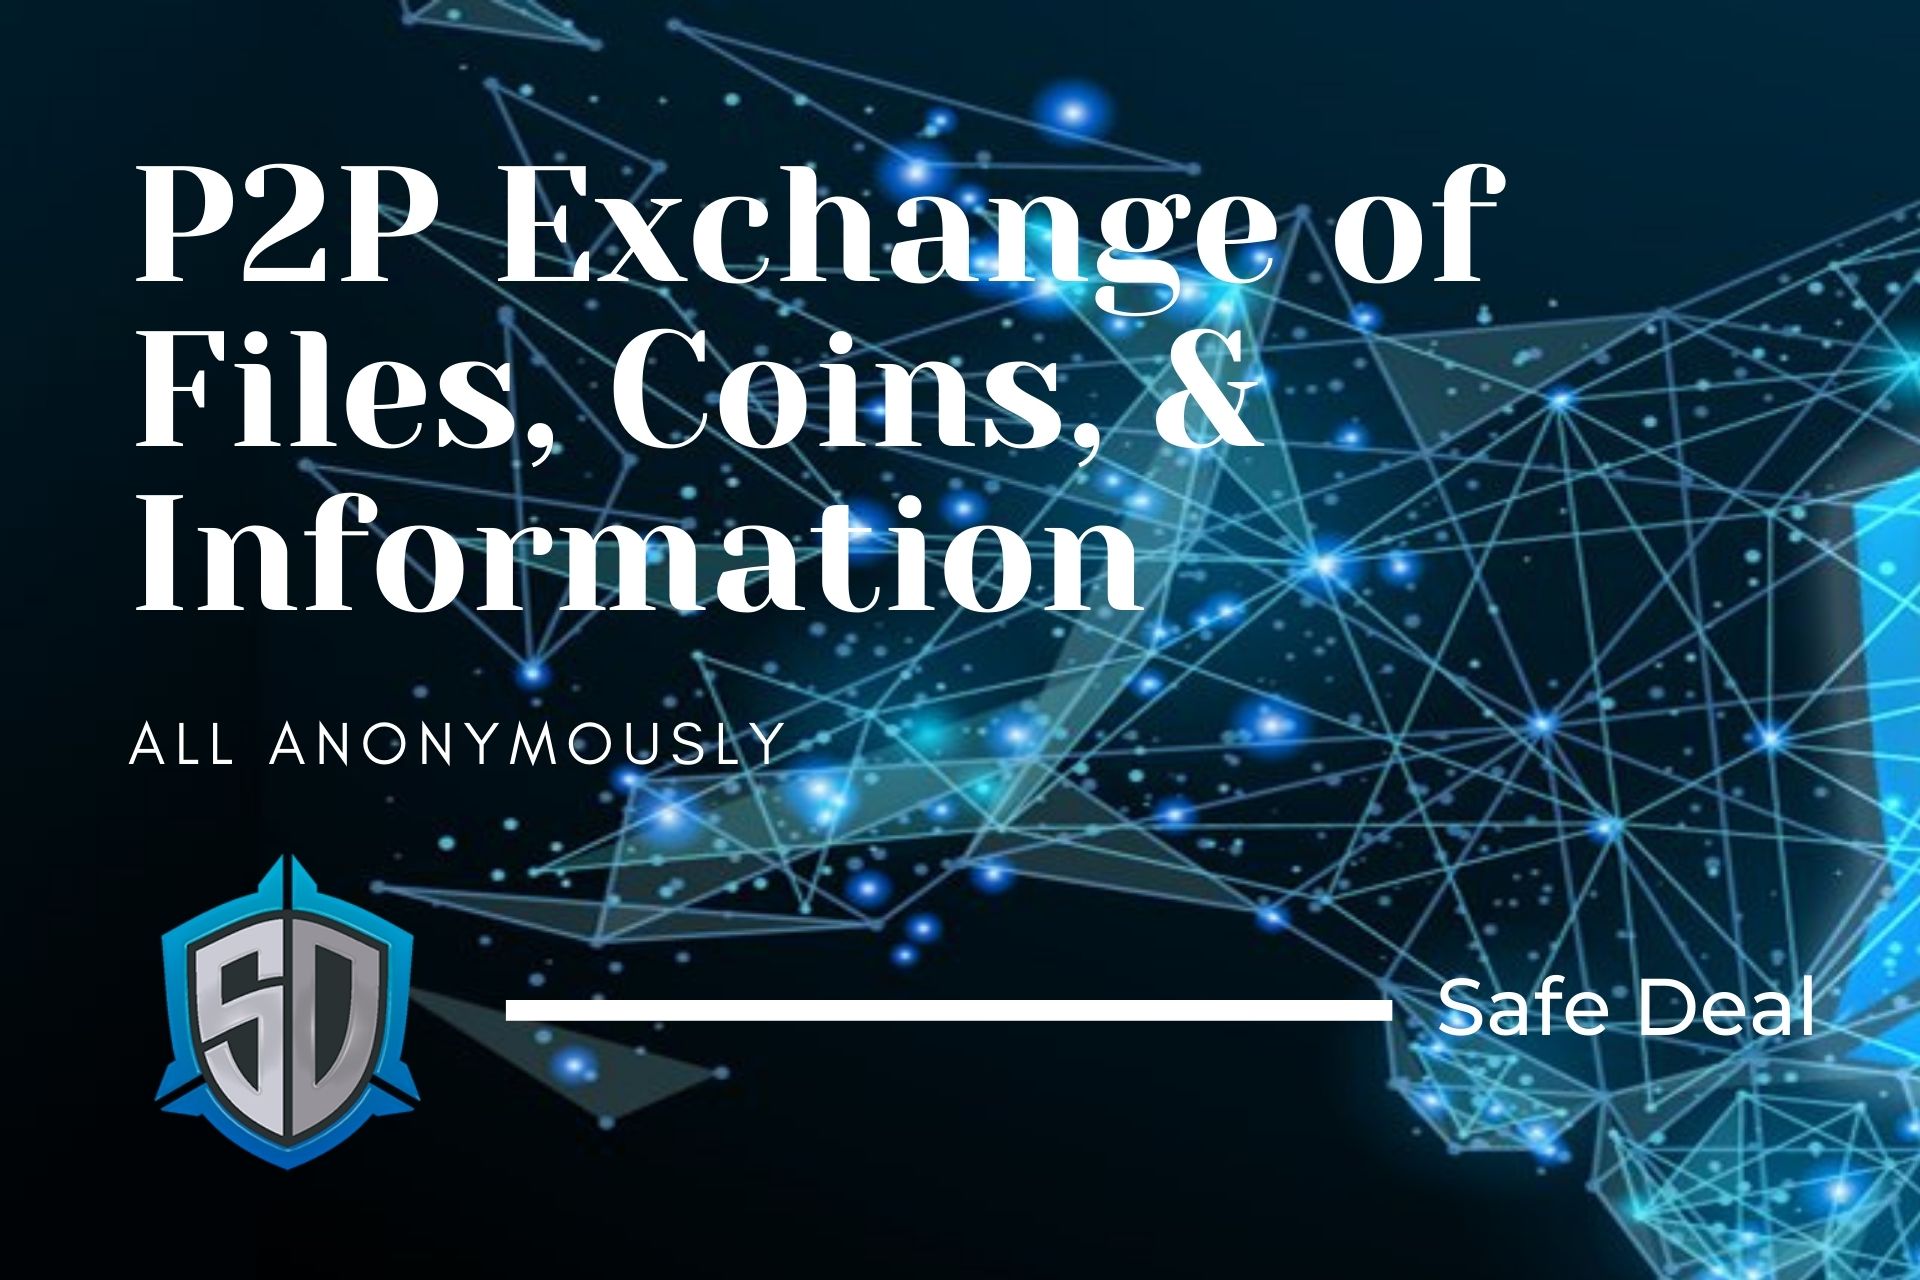 Safe Deal - Allowing P2P Exchange of Files, Coins ...